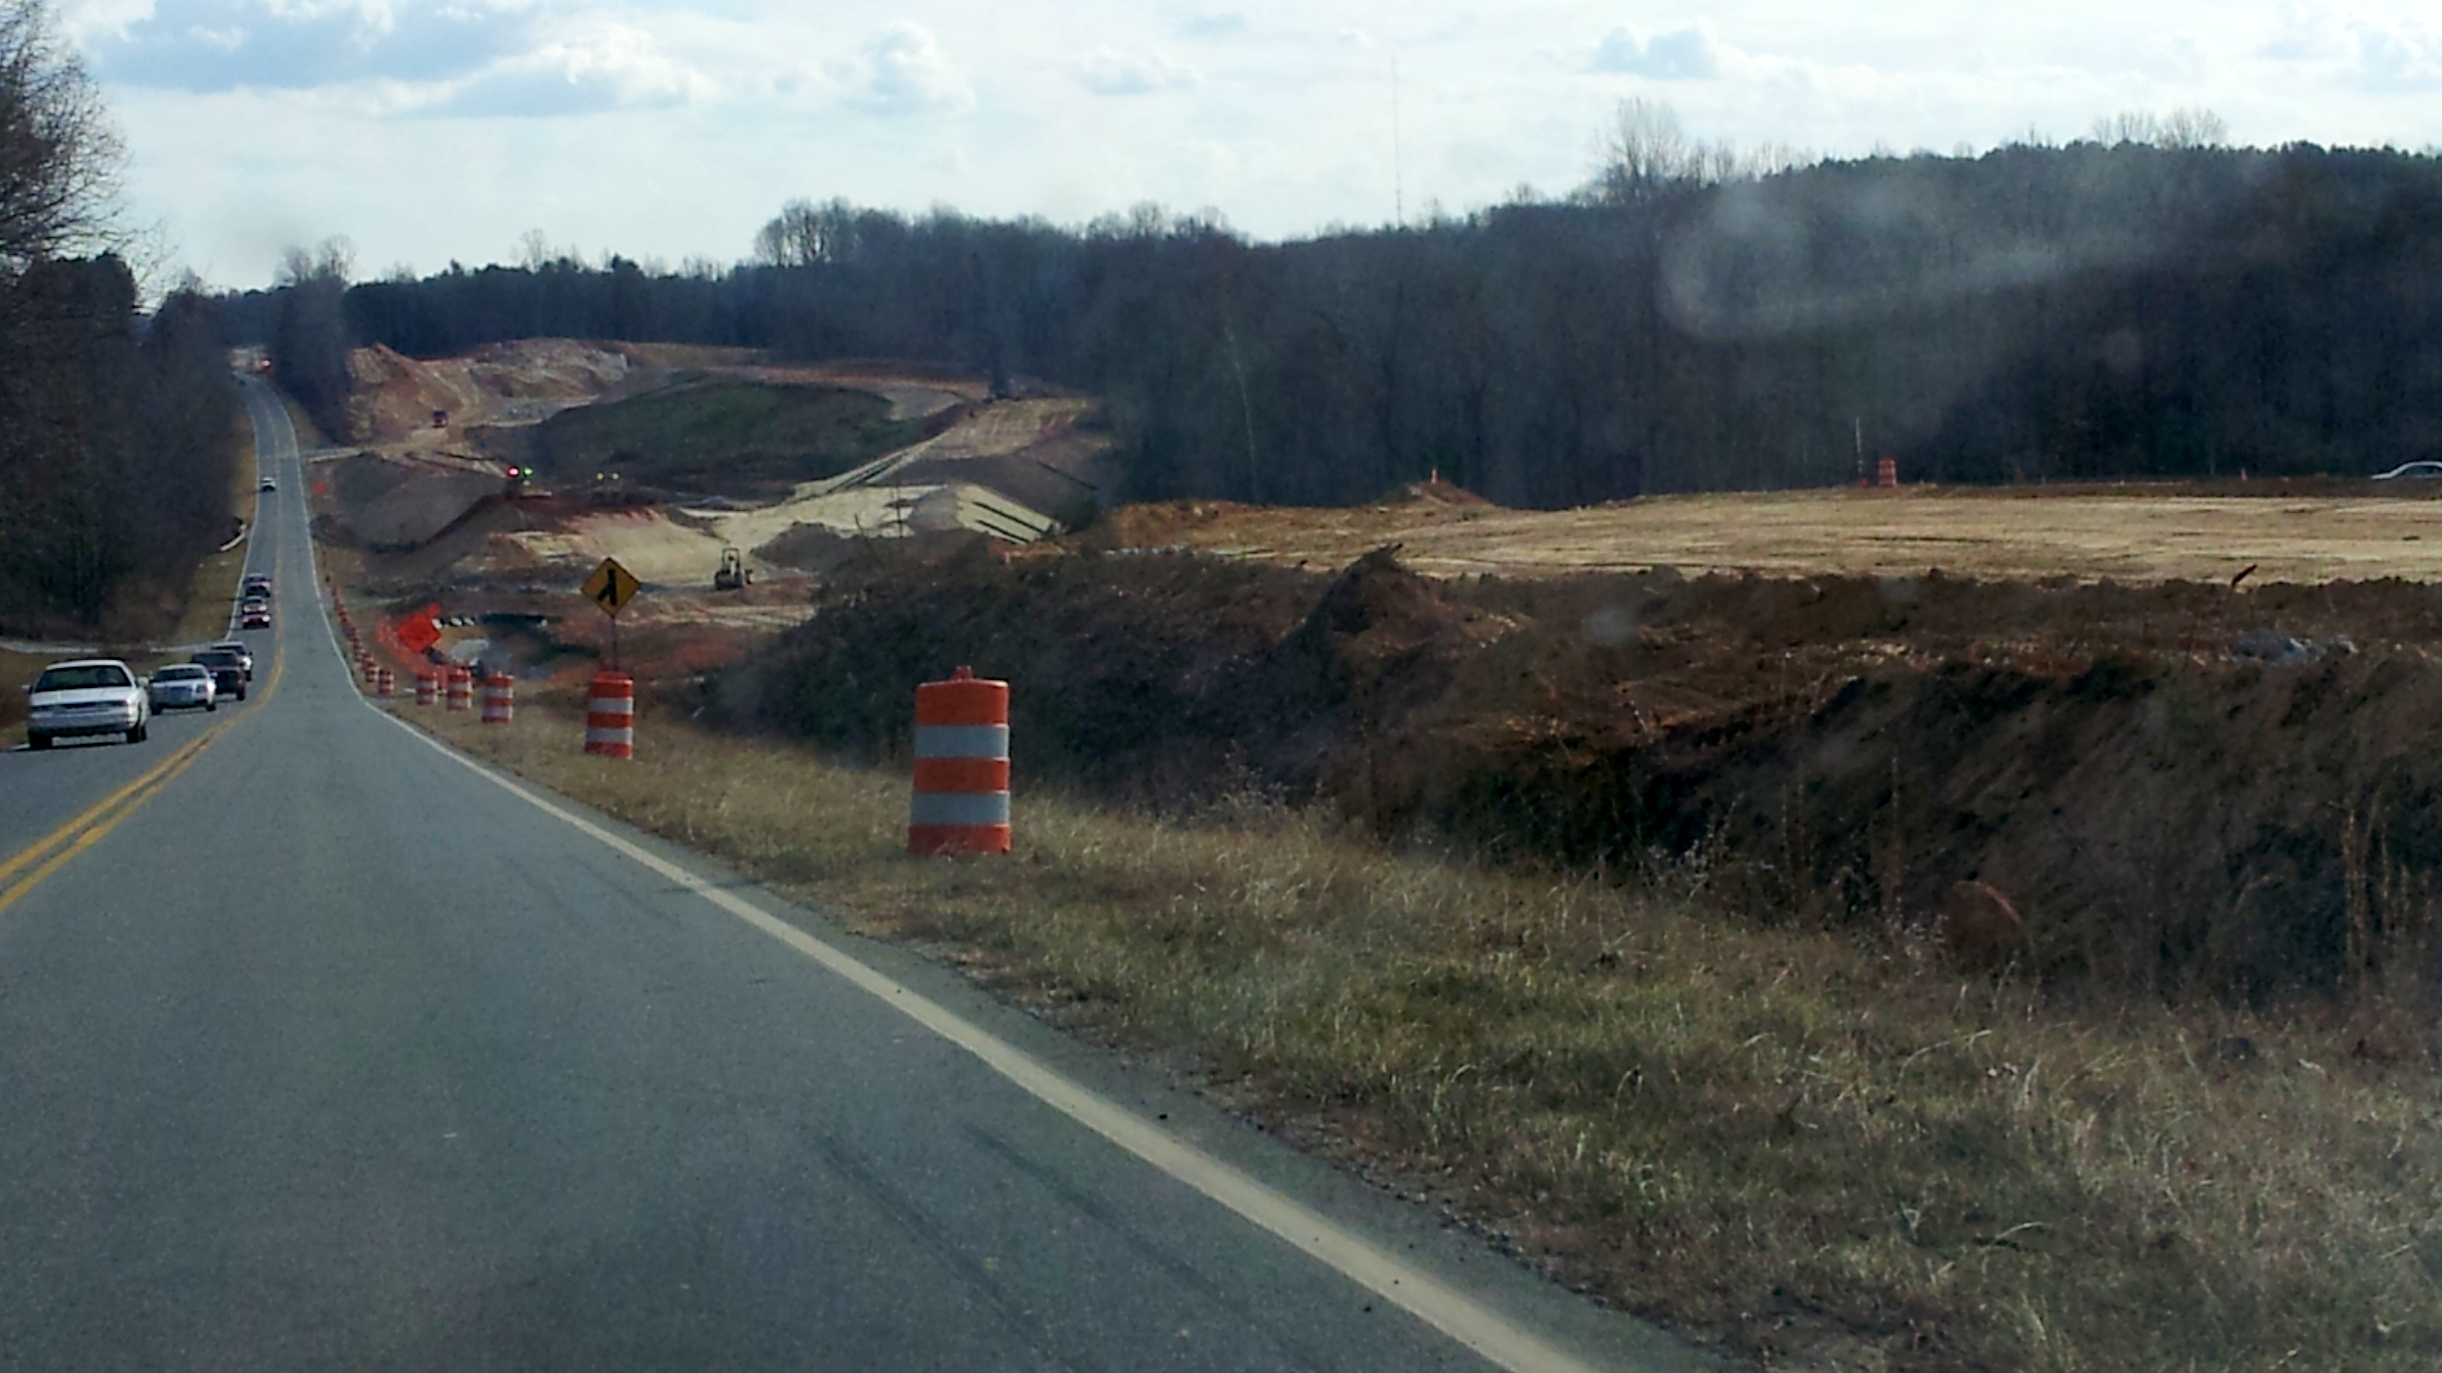 Photo of future I-73 offramp for US 220, Dec. 2012, courtesy of Strider